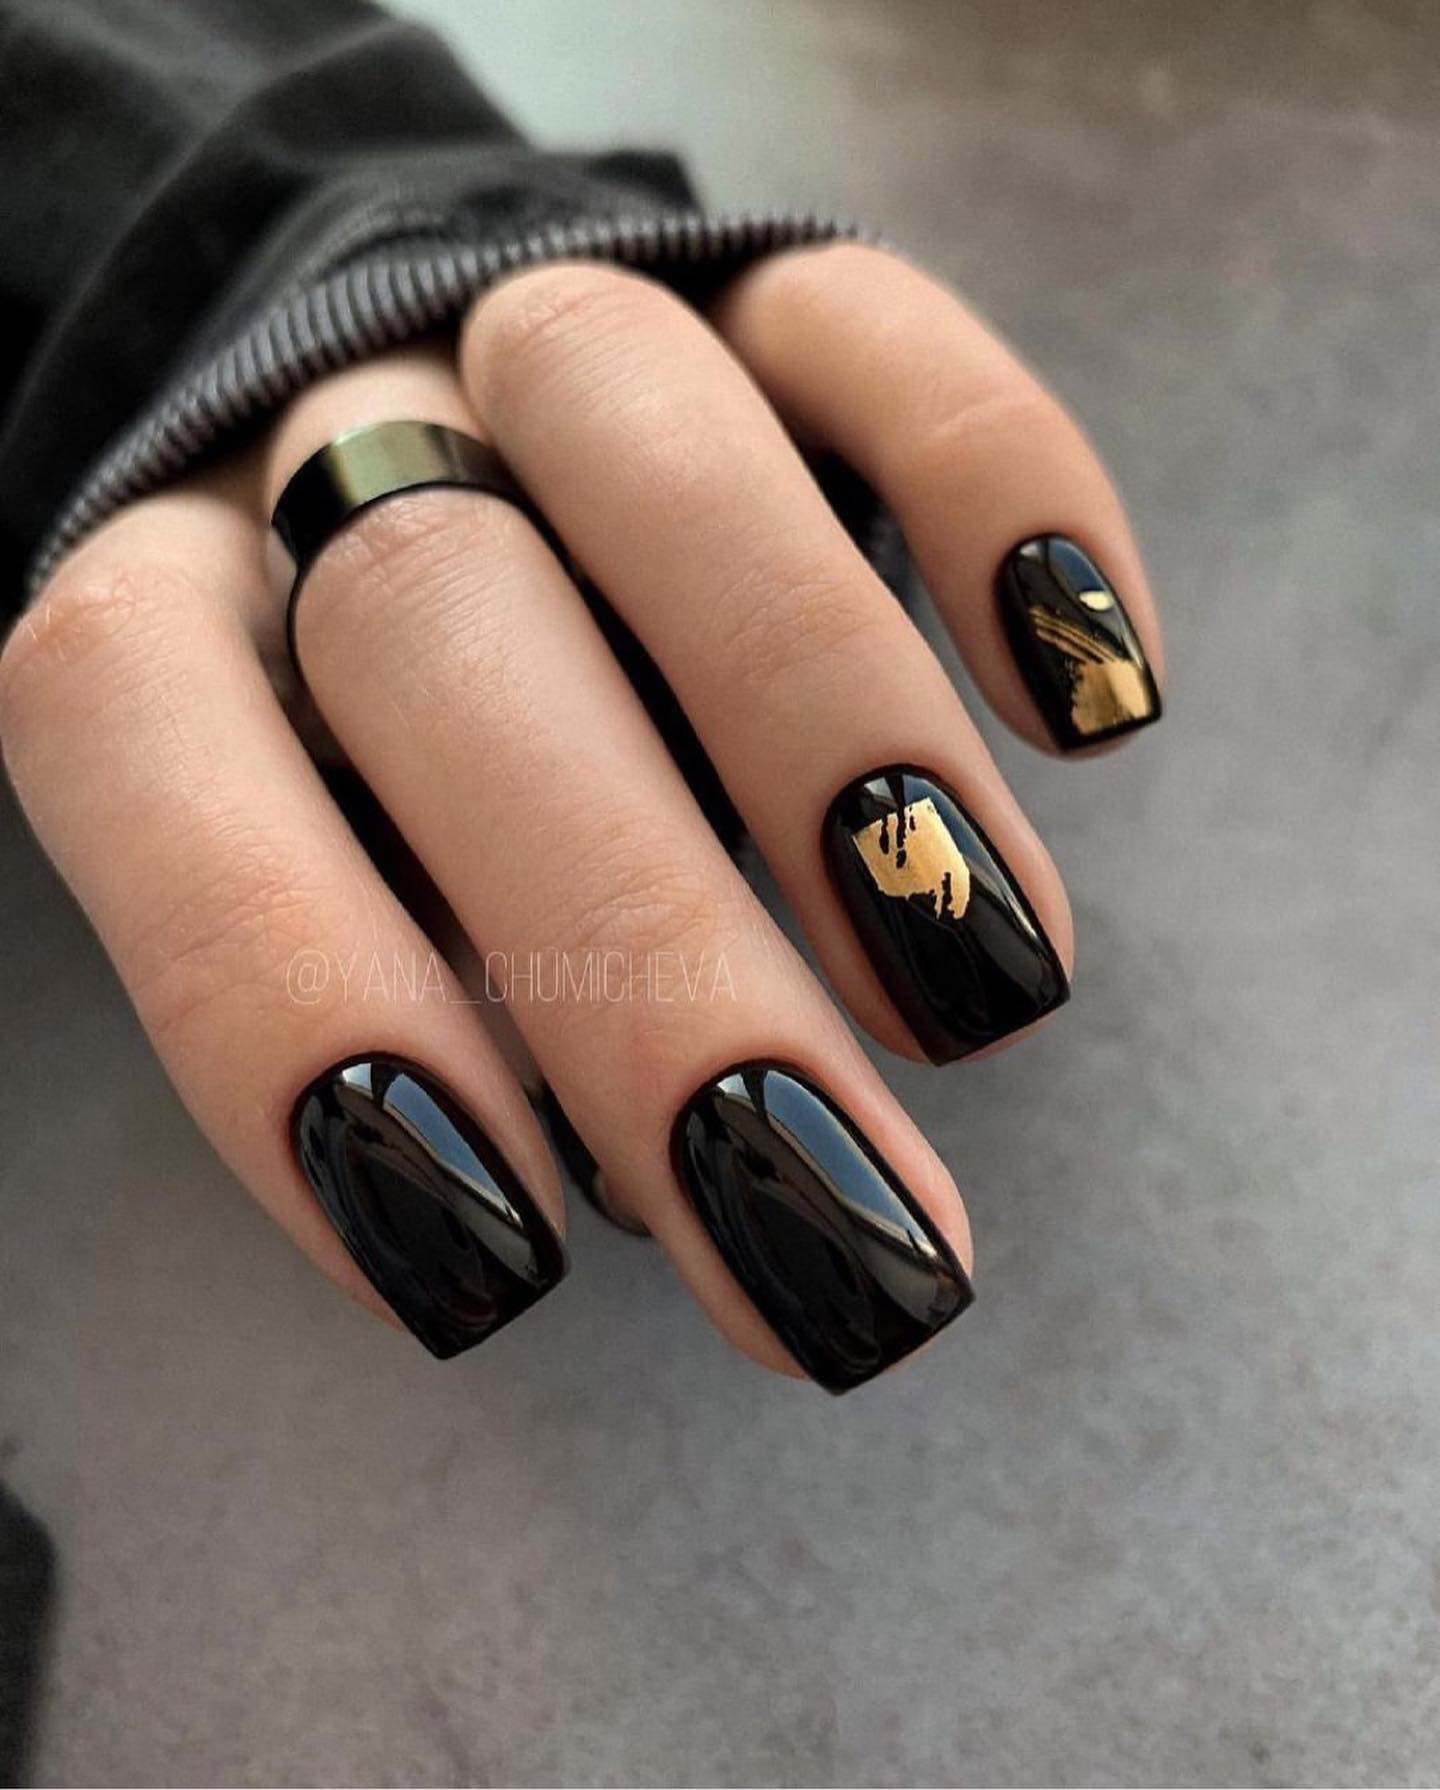 100+ Short Nail Designs You’ll Want To Try This Year images 69